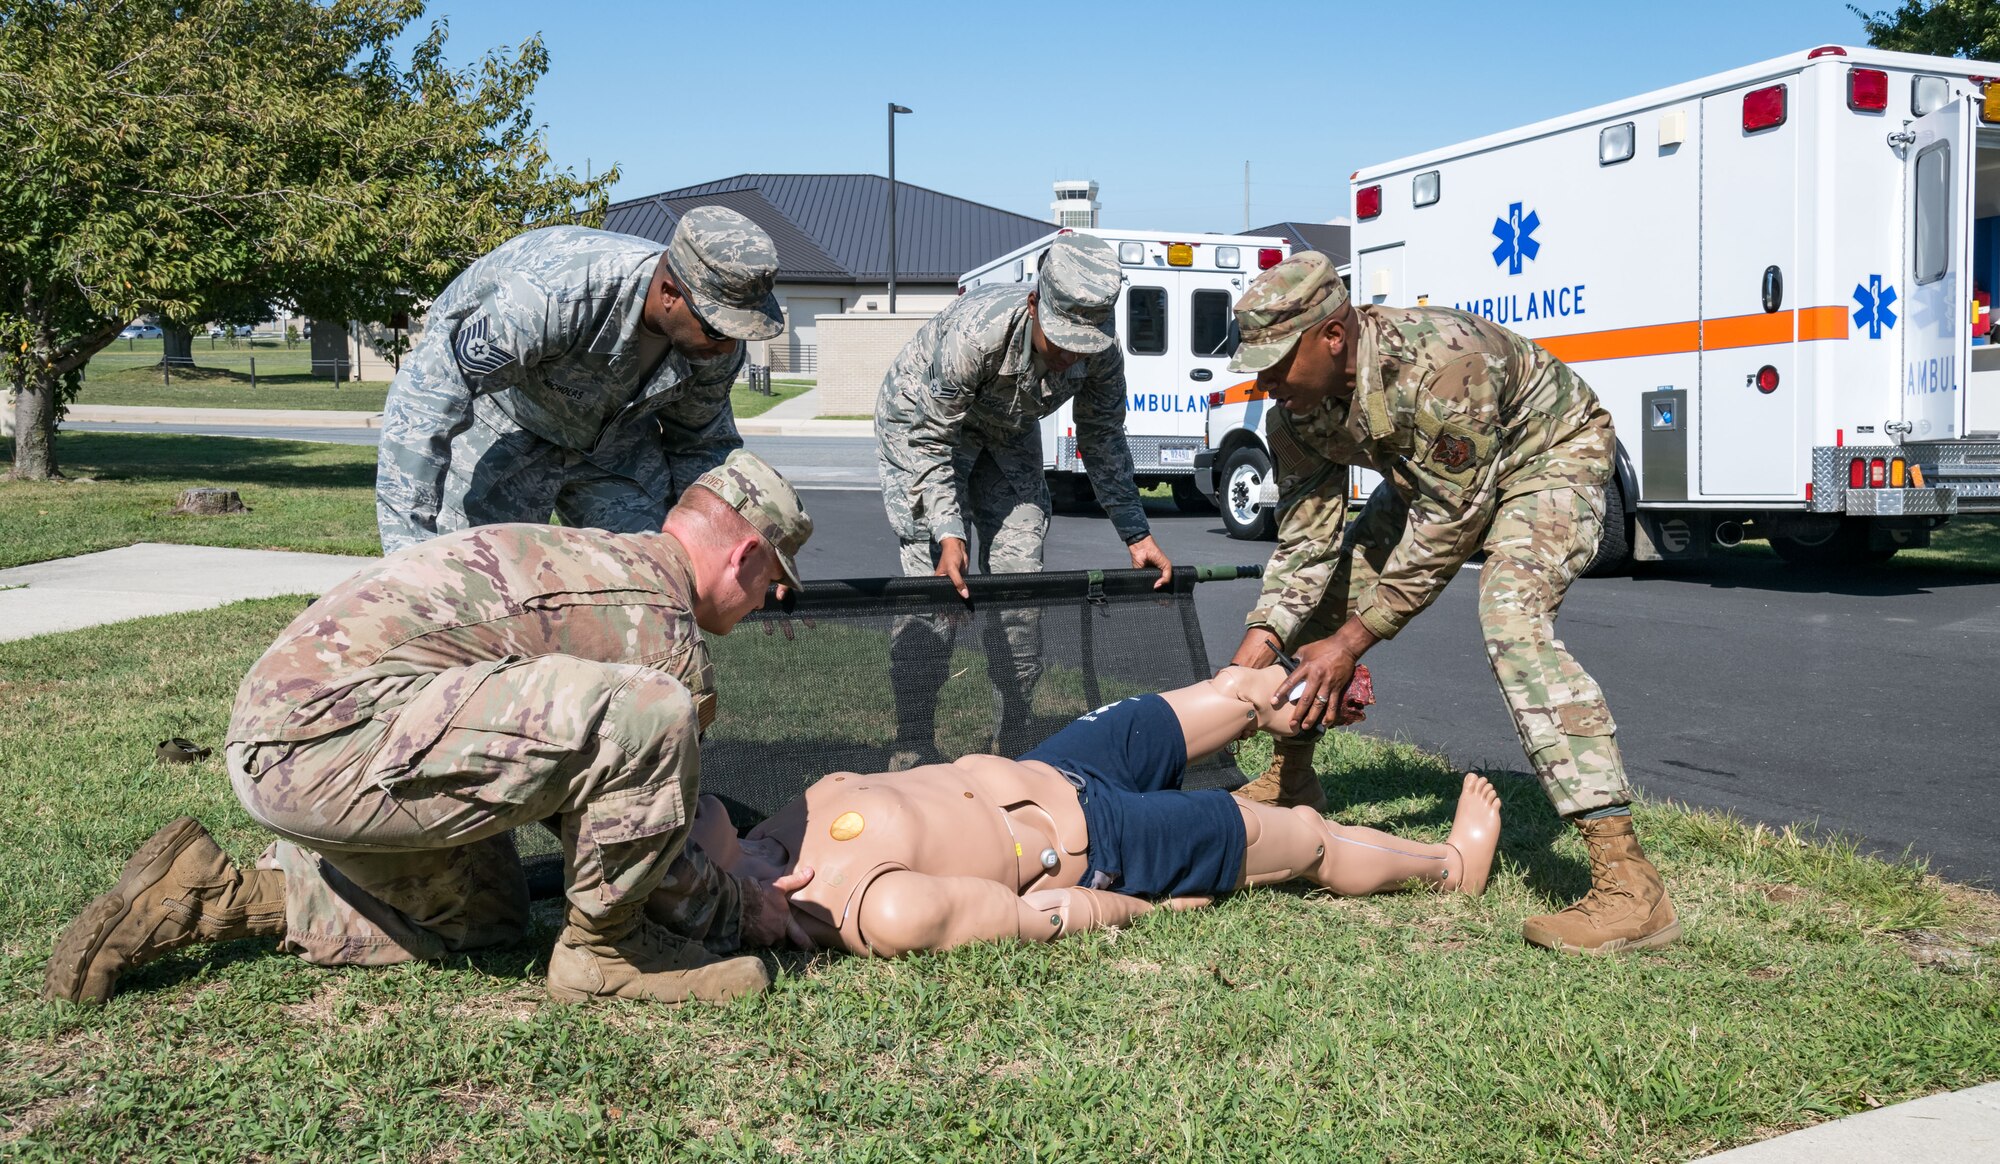 Chief Master Sgt. of the Air Force Kaleth O. Wright participates in the 436th Medical Group’s “Best of the Best” competition Sept. 3, 2019, at Dover Air Force Base, Del. Participants performed tourniquet application, litter carrying and pharmacy procedures during the competition. (U.S. Air Force photo by Roland Balik)